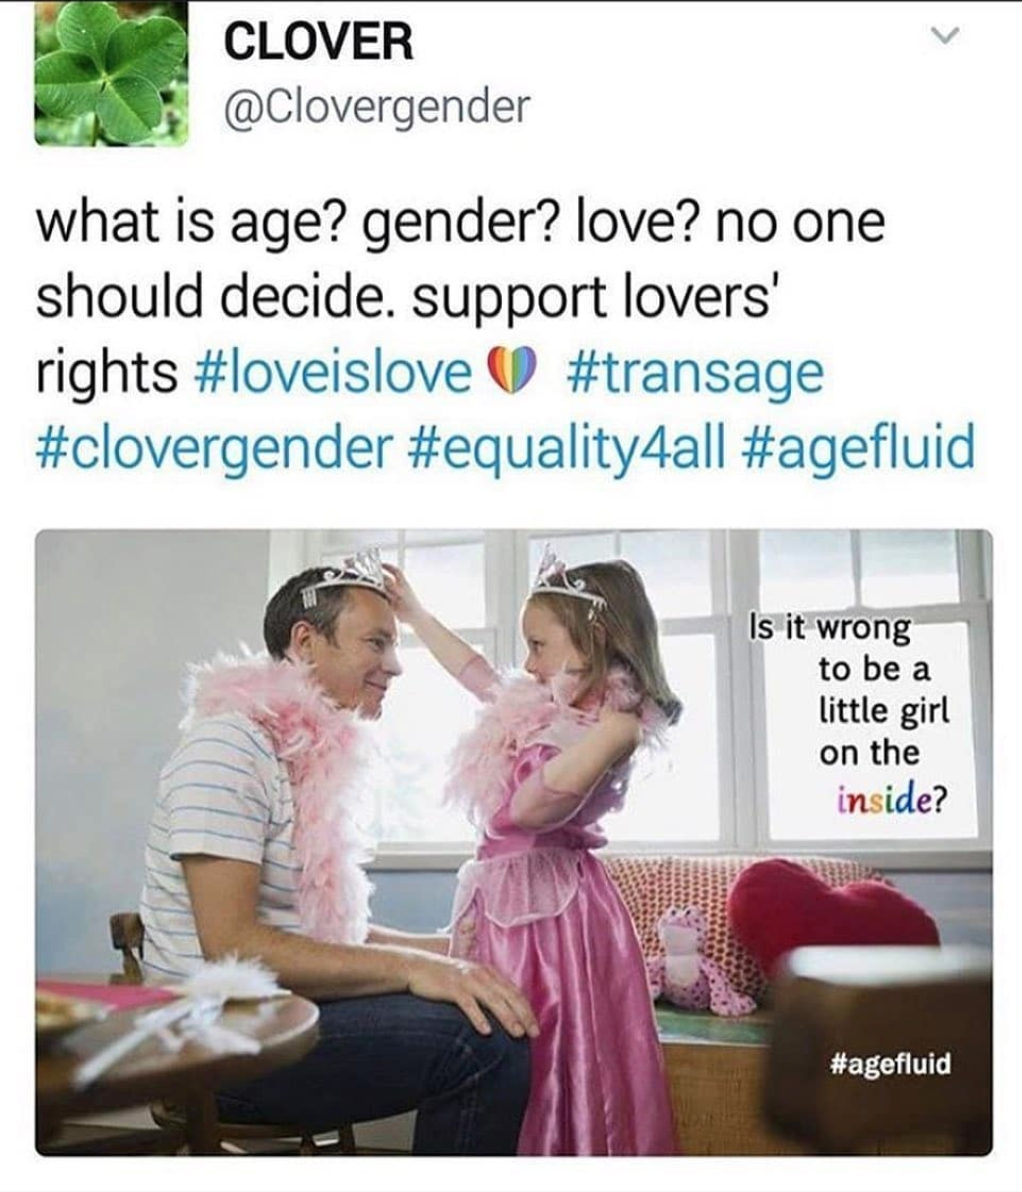 media - Clover what is age? gender? love? no one should decide. support lovers' rights Is it wrong to be a little girl on the inside?